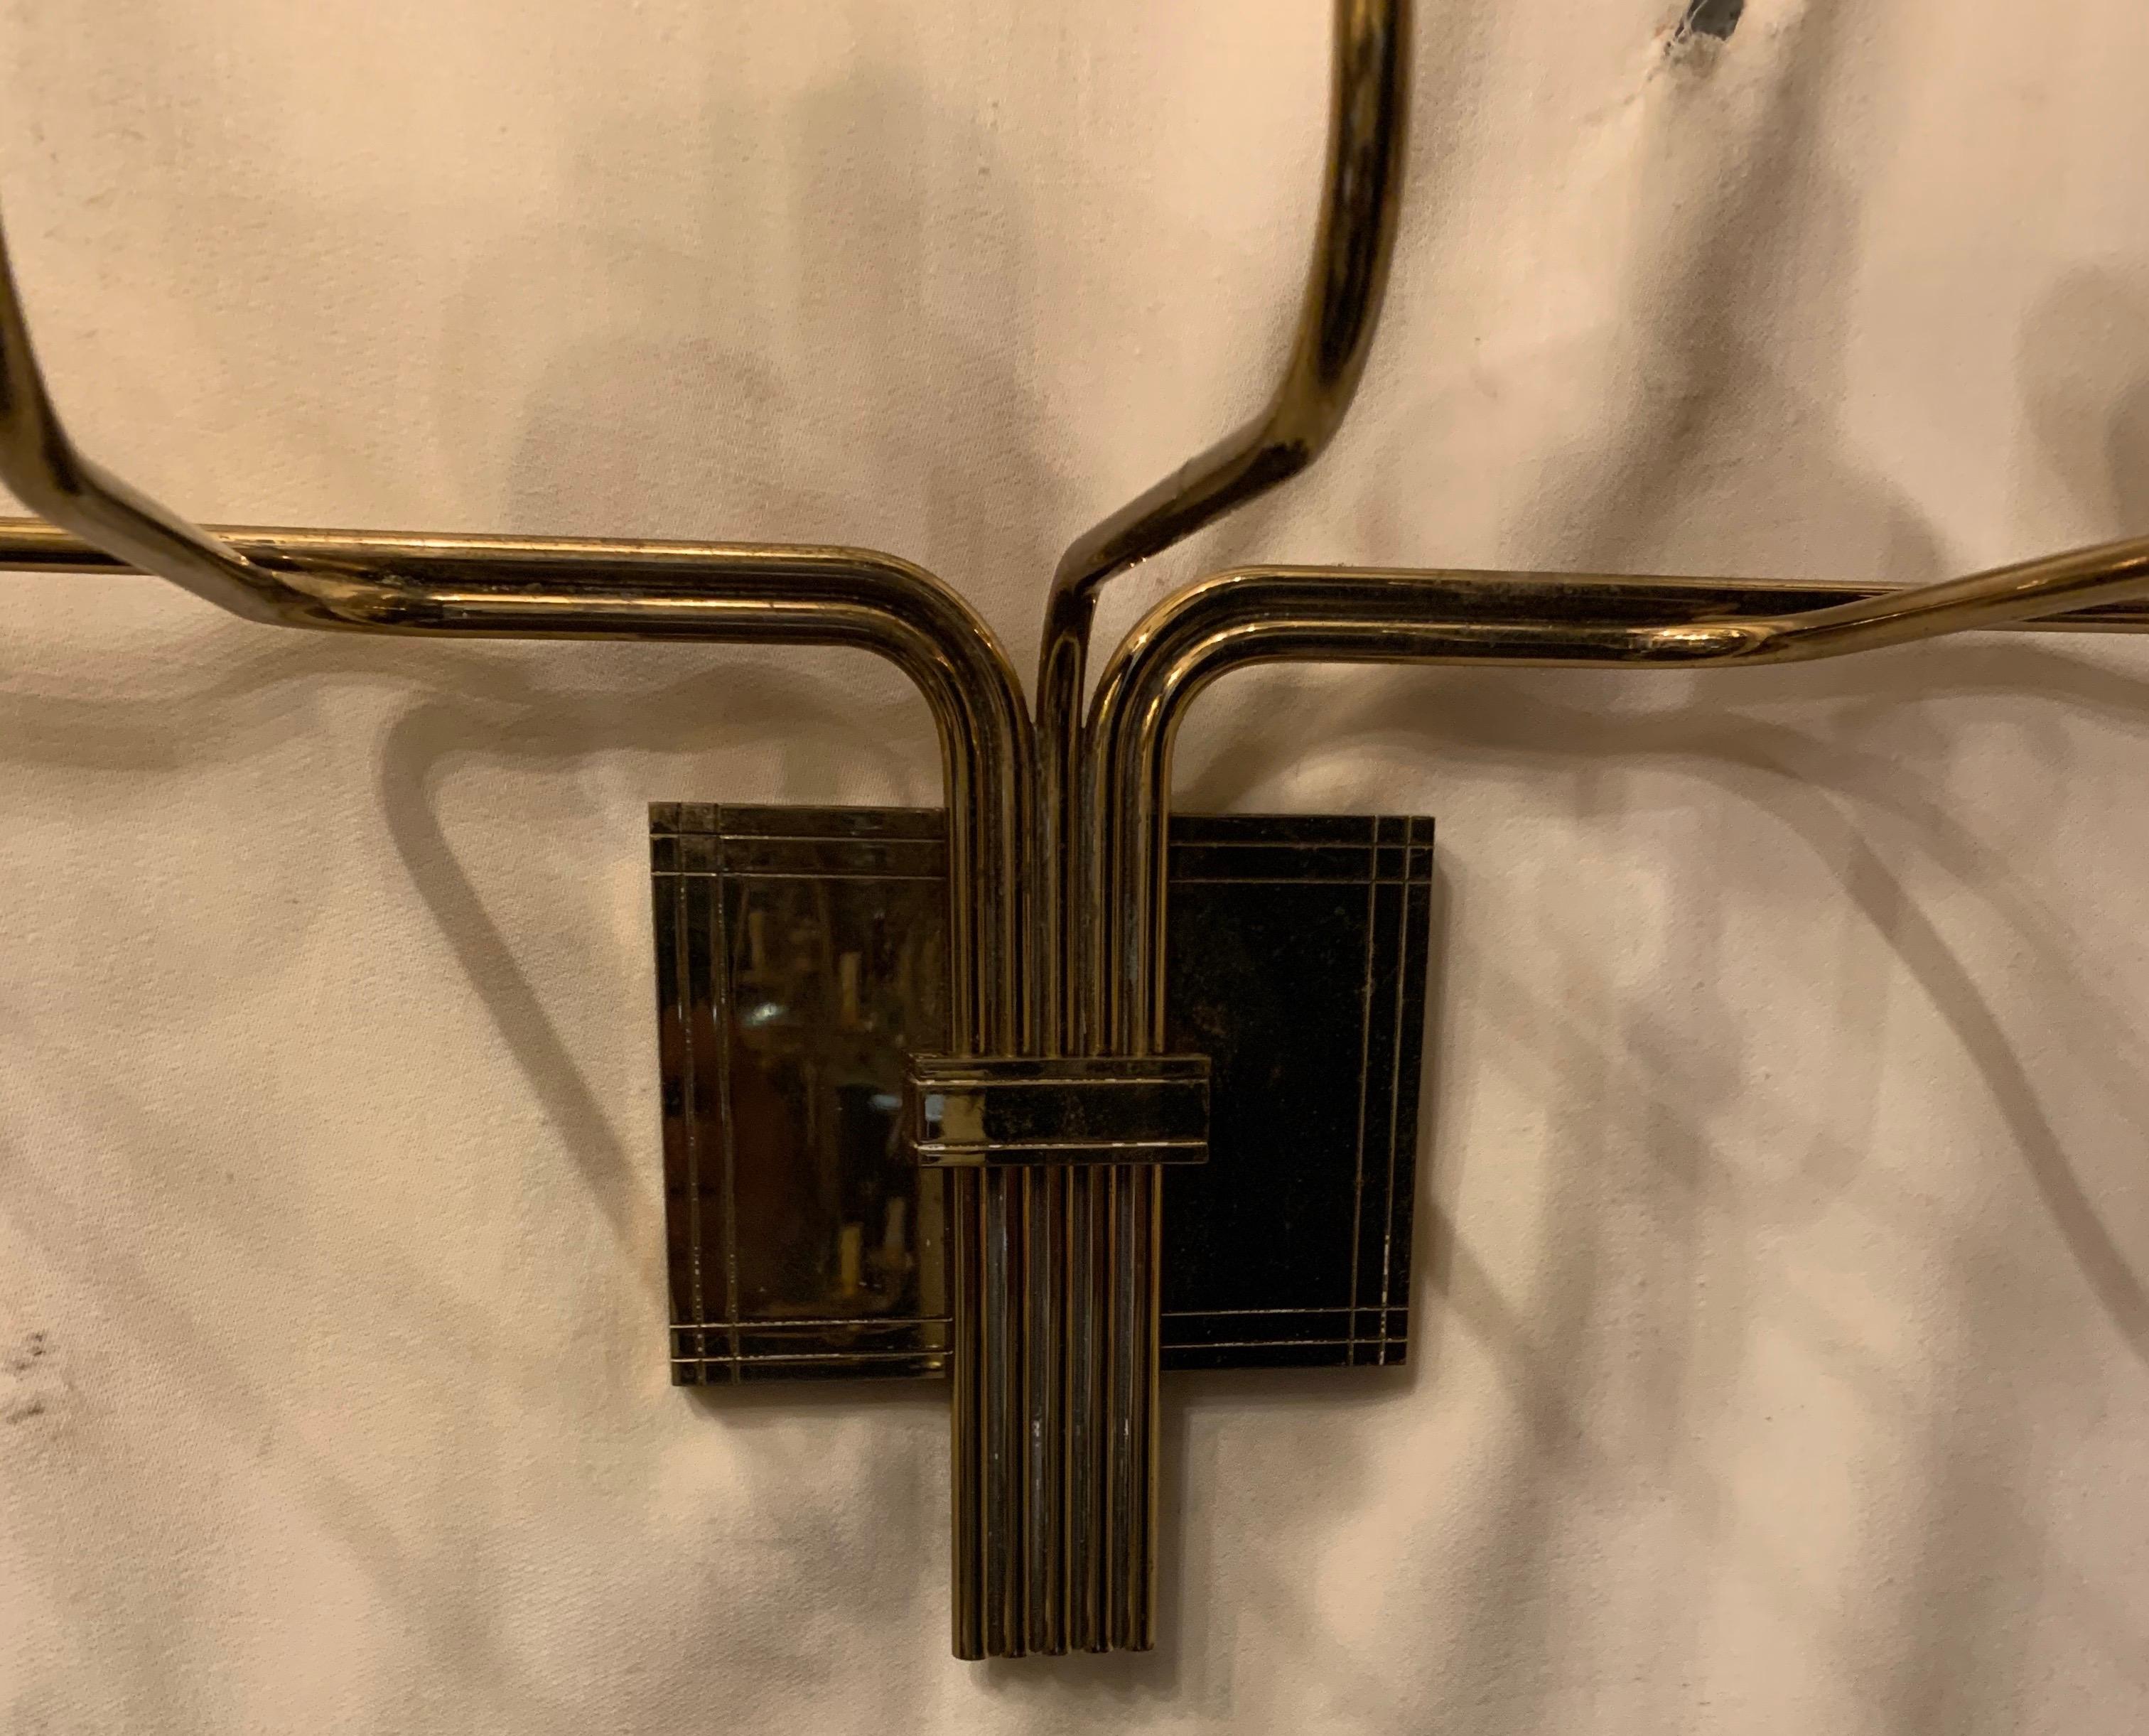 An elegant Mid-Century Modern large five-arm candle sconce designed by Tommi Parzinger, manufactured by Dorlyn Silversmiths.
Each arm extends from a group mounted on a rectangular back plate with an incised linear design.